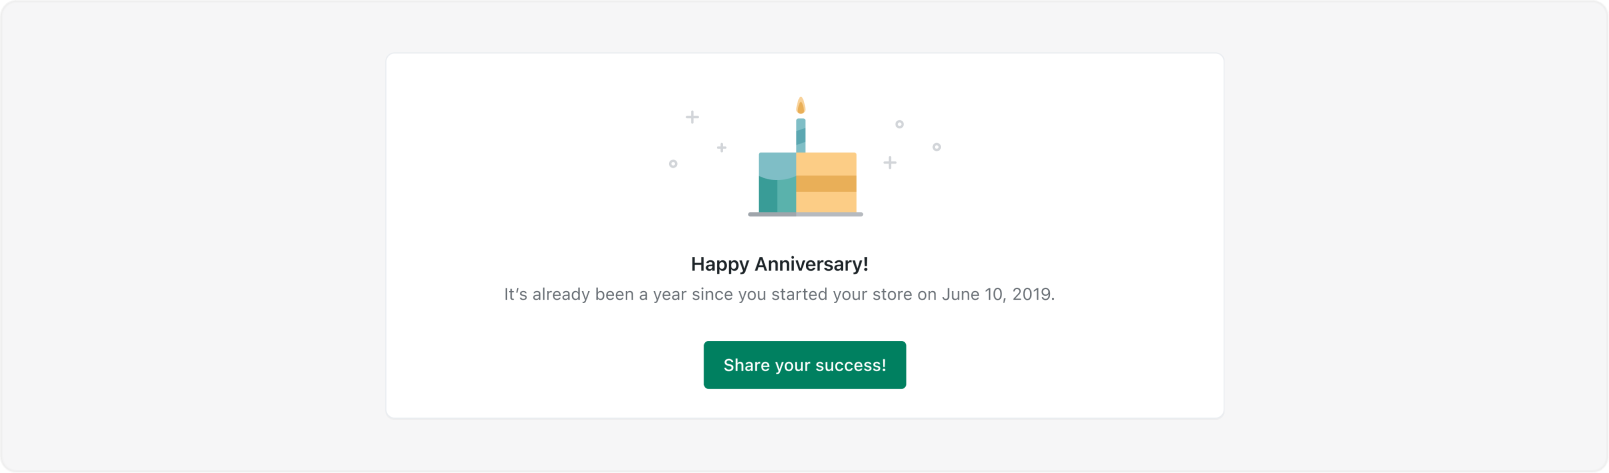 An illustration celebrating a store anniversary.